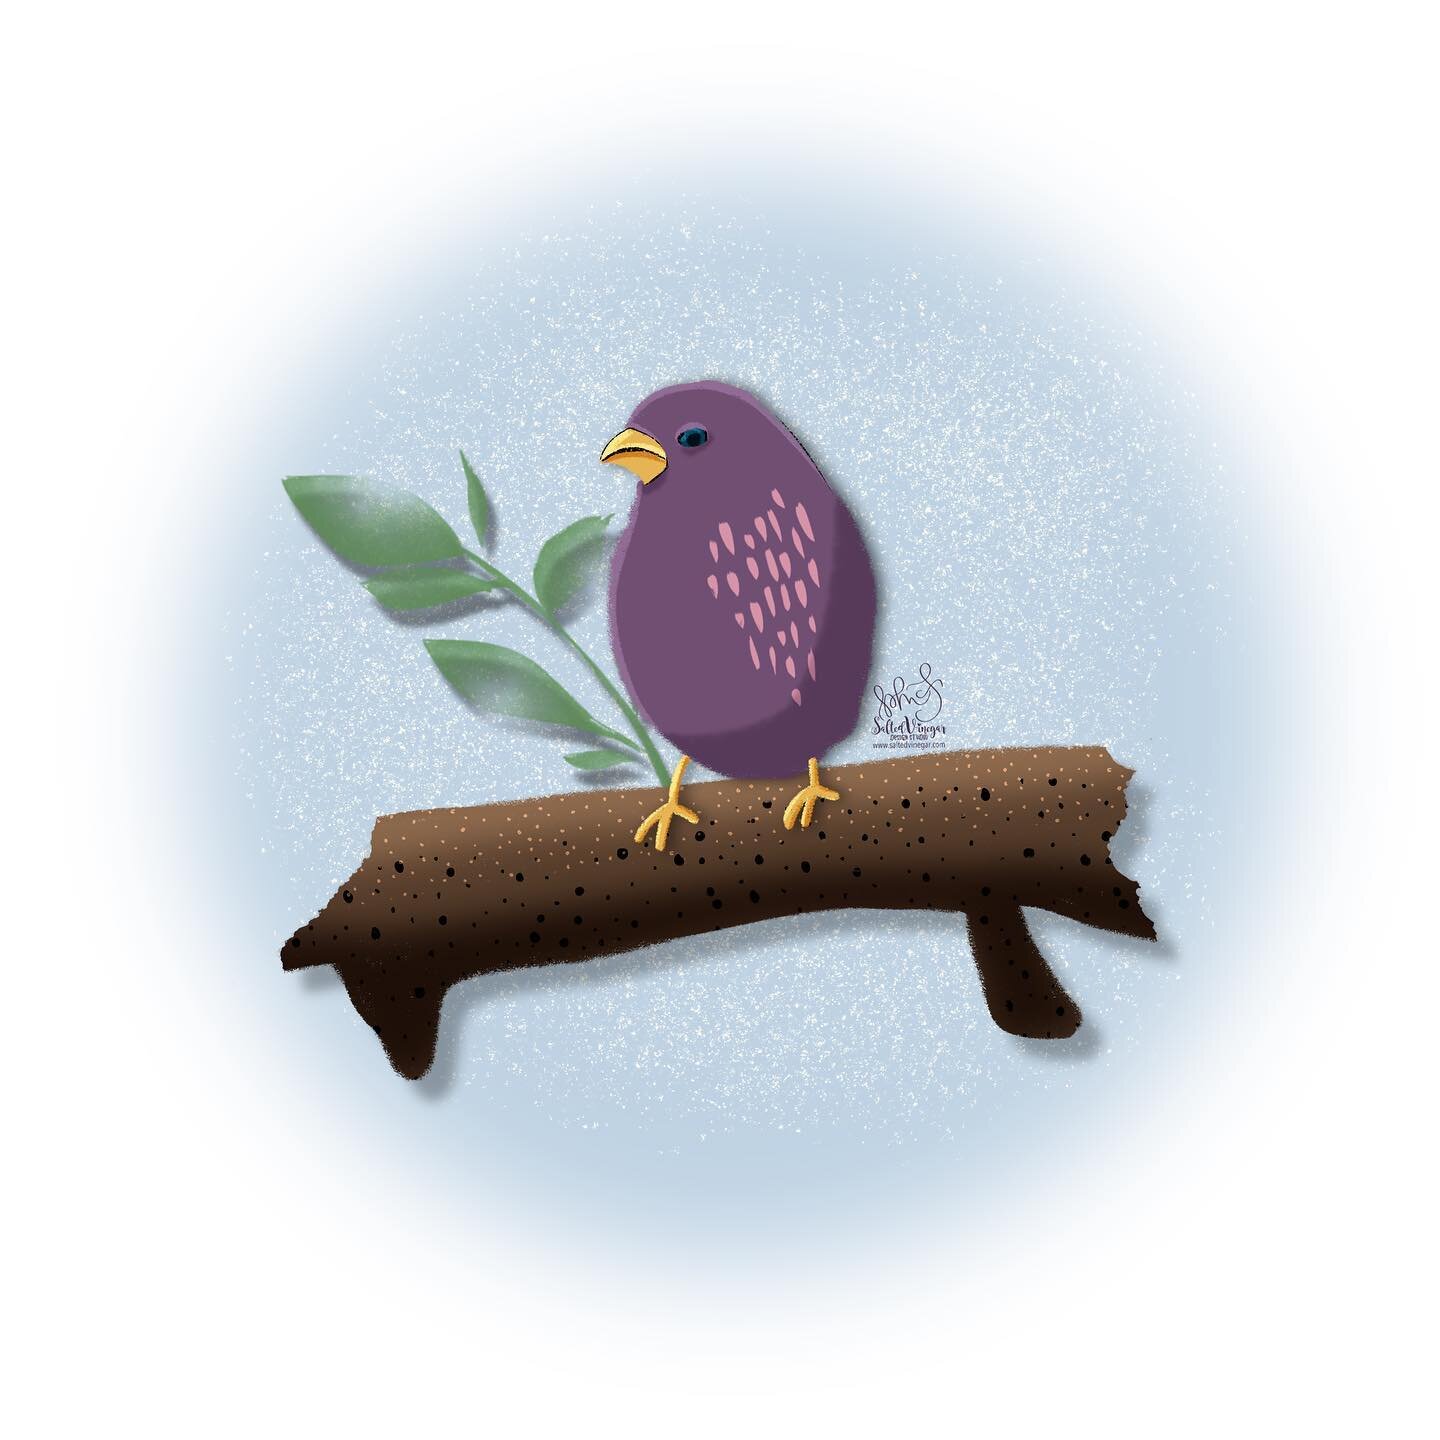 Another #mm2023fun bird today. I&rsquo;m working on gaining assets for my upcoming Magical Meadow patterns and I know birds will be a big part of that. And I guess I&rsquo;m drawn to this color purple too. Maybe tomorrow I&rsquo;ll try a new color bi